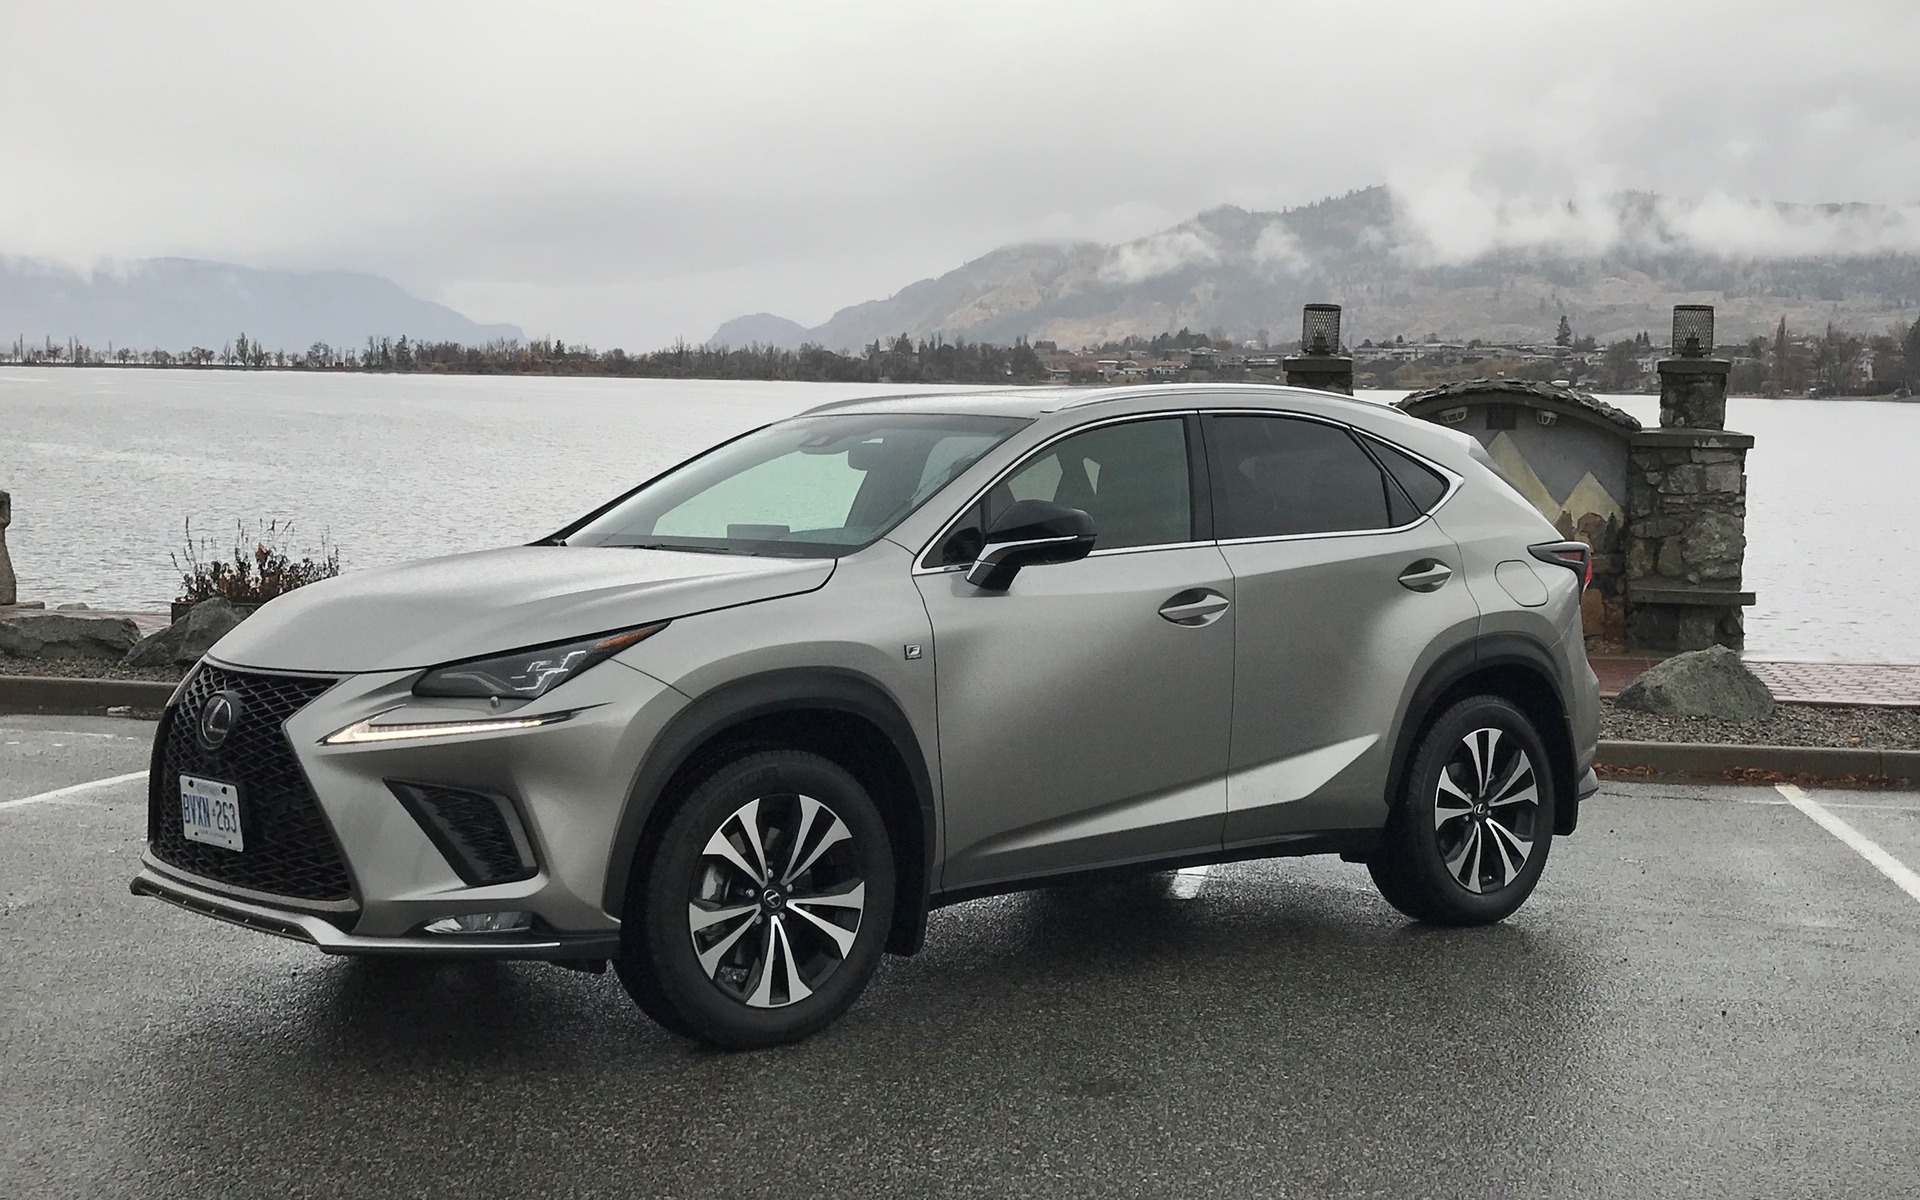 2018 Lexus NX: Maybe You Don't Know it as Well as You Think - The Car Guide